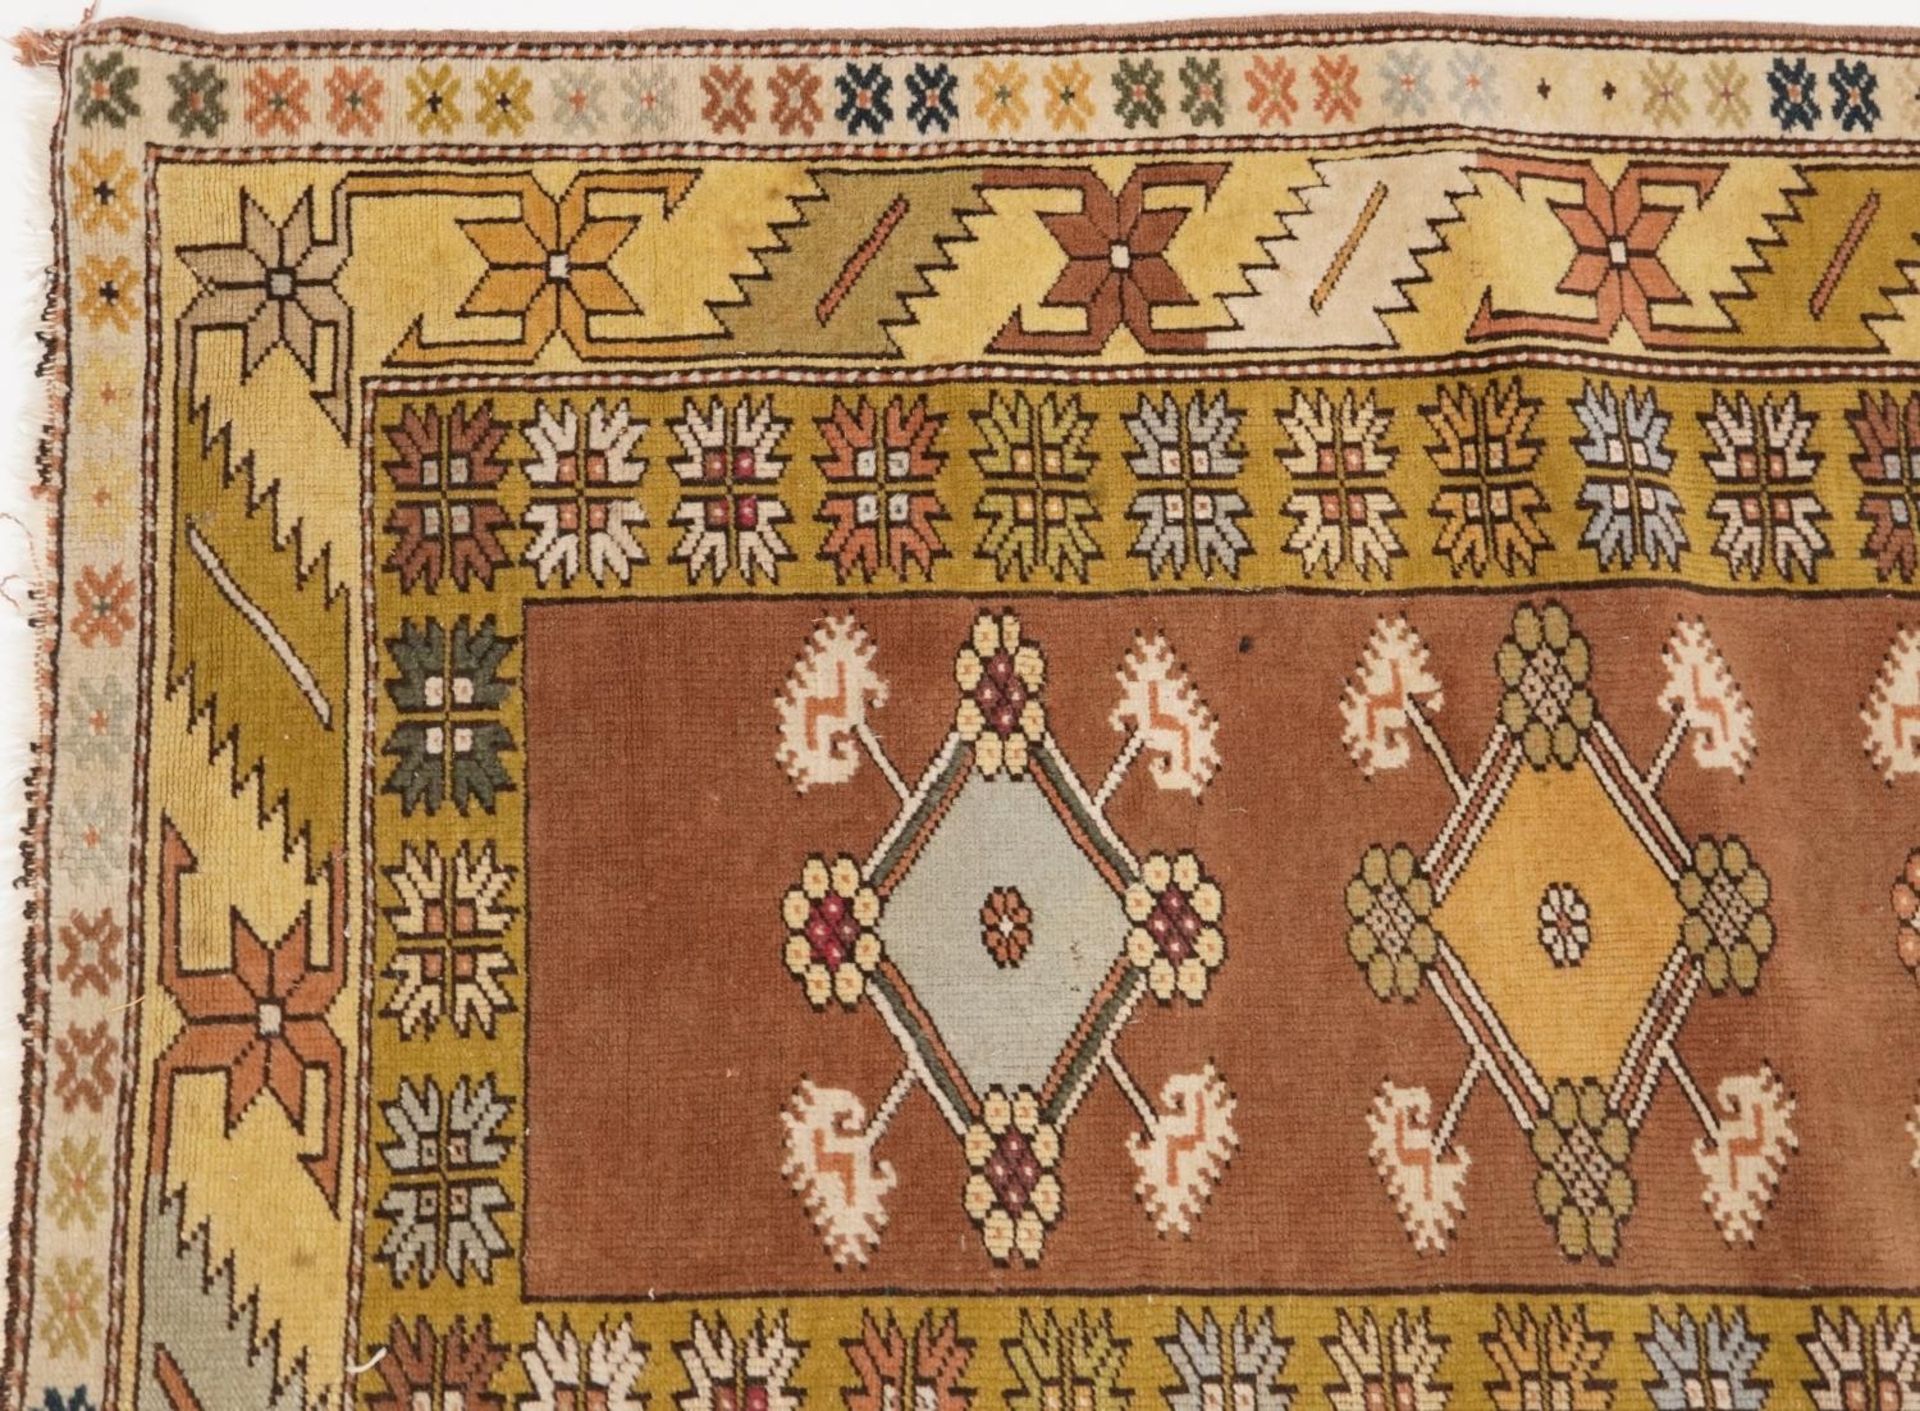 Rectangular beige ground rug with all over geometric design, 200cm x 117 - Image 2 of 5